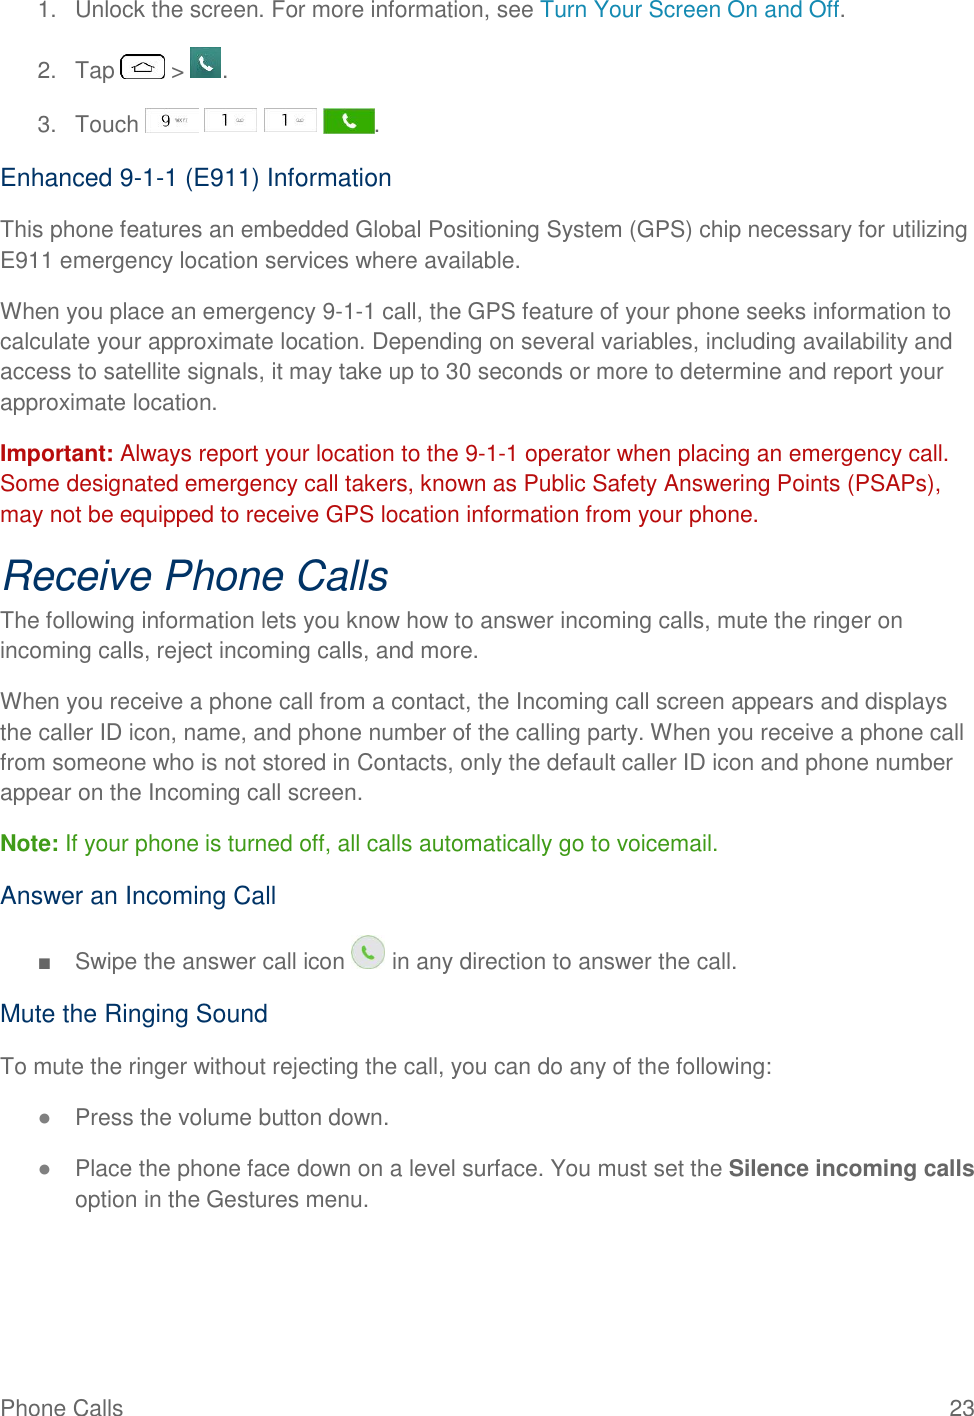 Phone Calls  23 1.  Unlock the screen. For more information, see Turn Your Screen On and Off. 2.  Tap   &gt;  . 3.  Touch        . Enhanced 9-1-1 (E911) Information This phone features an embedded Global Positioning System (GPS) chip necessary for utilizing E911 emergency location services where available. When you place an emergency 9-1-1 call, the GPS feature of your phone seeks information to calculate your approximate location. Depending on several variables, including availability and access to satellite signals, it may take up to 30 seconds or more to determine and report your approximate location. Important: Always report your location to the 9-1-1 operator when placing an emergency call. Some designated emergency call takers, known as Public Safety Answering Points (PSAPs), may not be equipped to receive GPS location information from your phone. Receive Phone Calls The following information lets you know how to answer incoming calls, mute the ringer on incoming calls, reject incoming calls, and more. When you receive a phone call from a contact, the Incoming call screen appears and displays the caller ID icon, name, and phone number of the calling party. When you receive a phone call from someone who is not stored in Contacts, only the default caller ID icon and phone number appear on the Incoming call screen. Note: If your phone is turned off, all calls automatically go to voicemail. Answer an Incoming Call ■  Swipe the answer call icon   in any direction to answer the call. Mute the Ringing Sound To mute the ringer without rejecting the call, you can do any of the following: ● Press the volume button down. ● Place the phone face down on a level surface. You must set the Silence incoming calls option in the Gestures menu. 